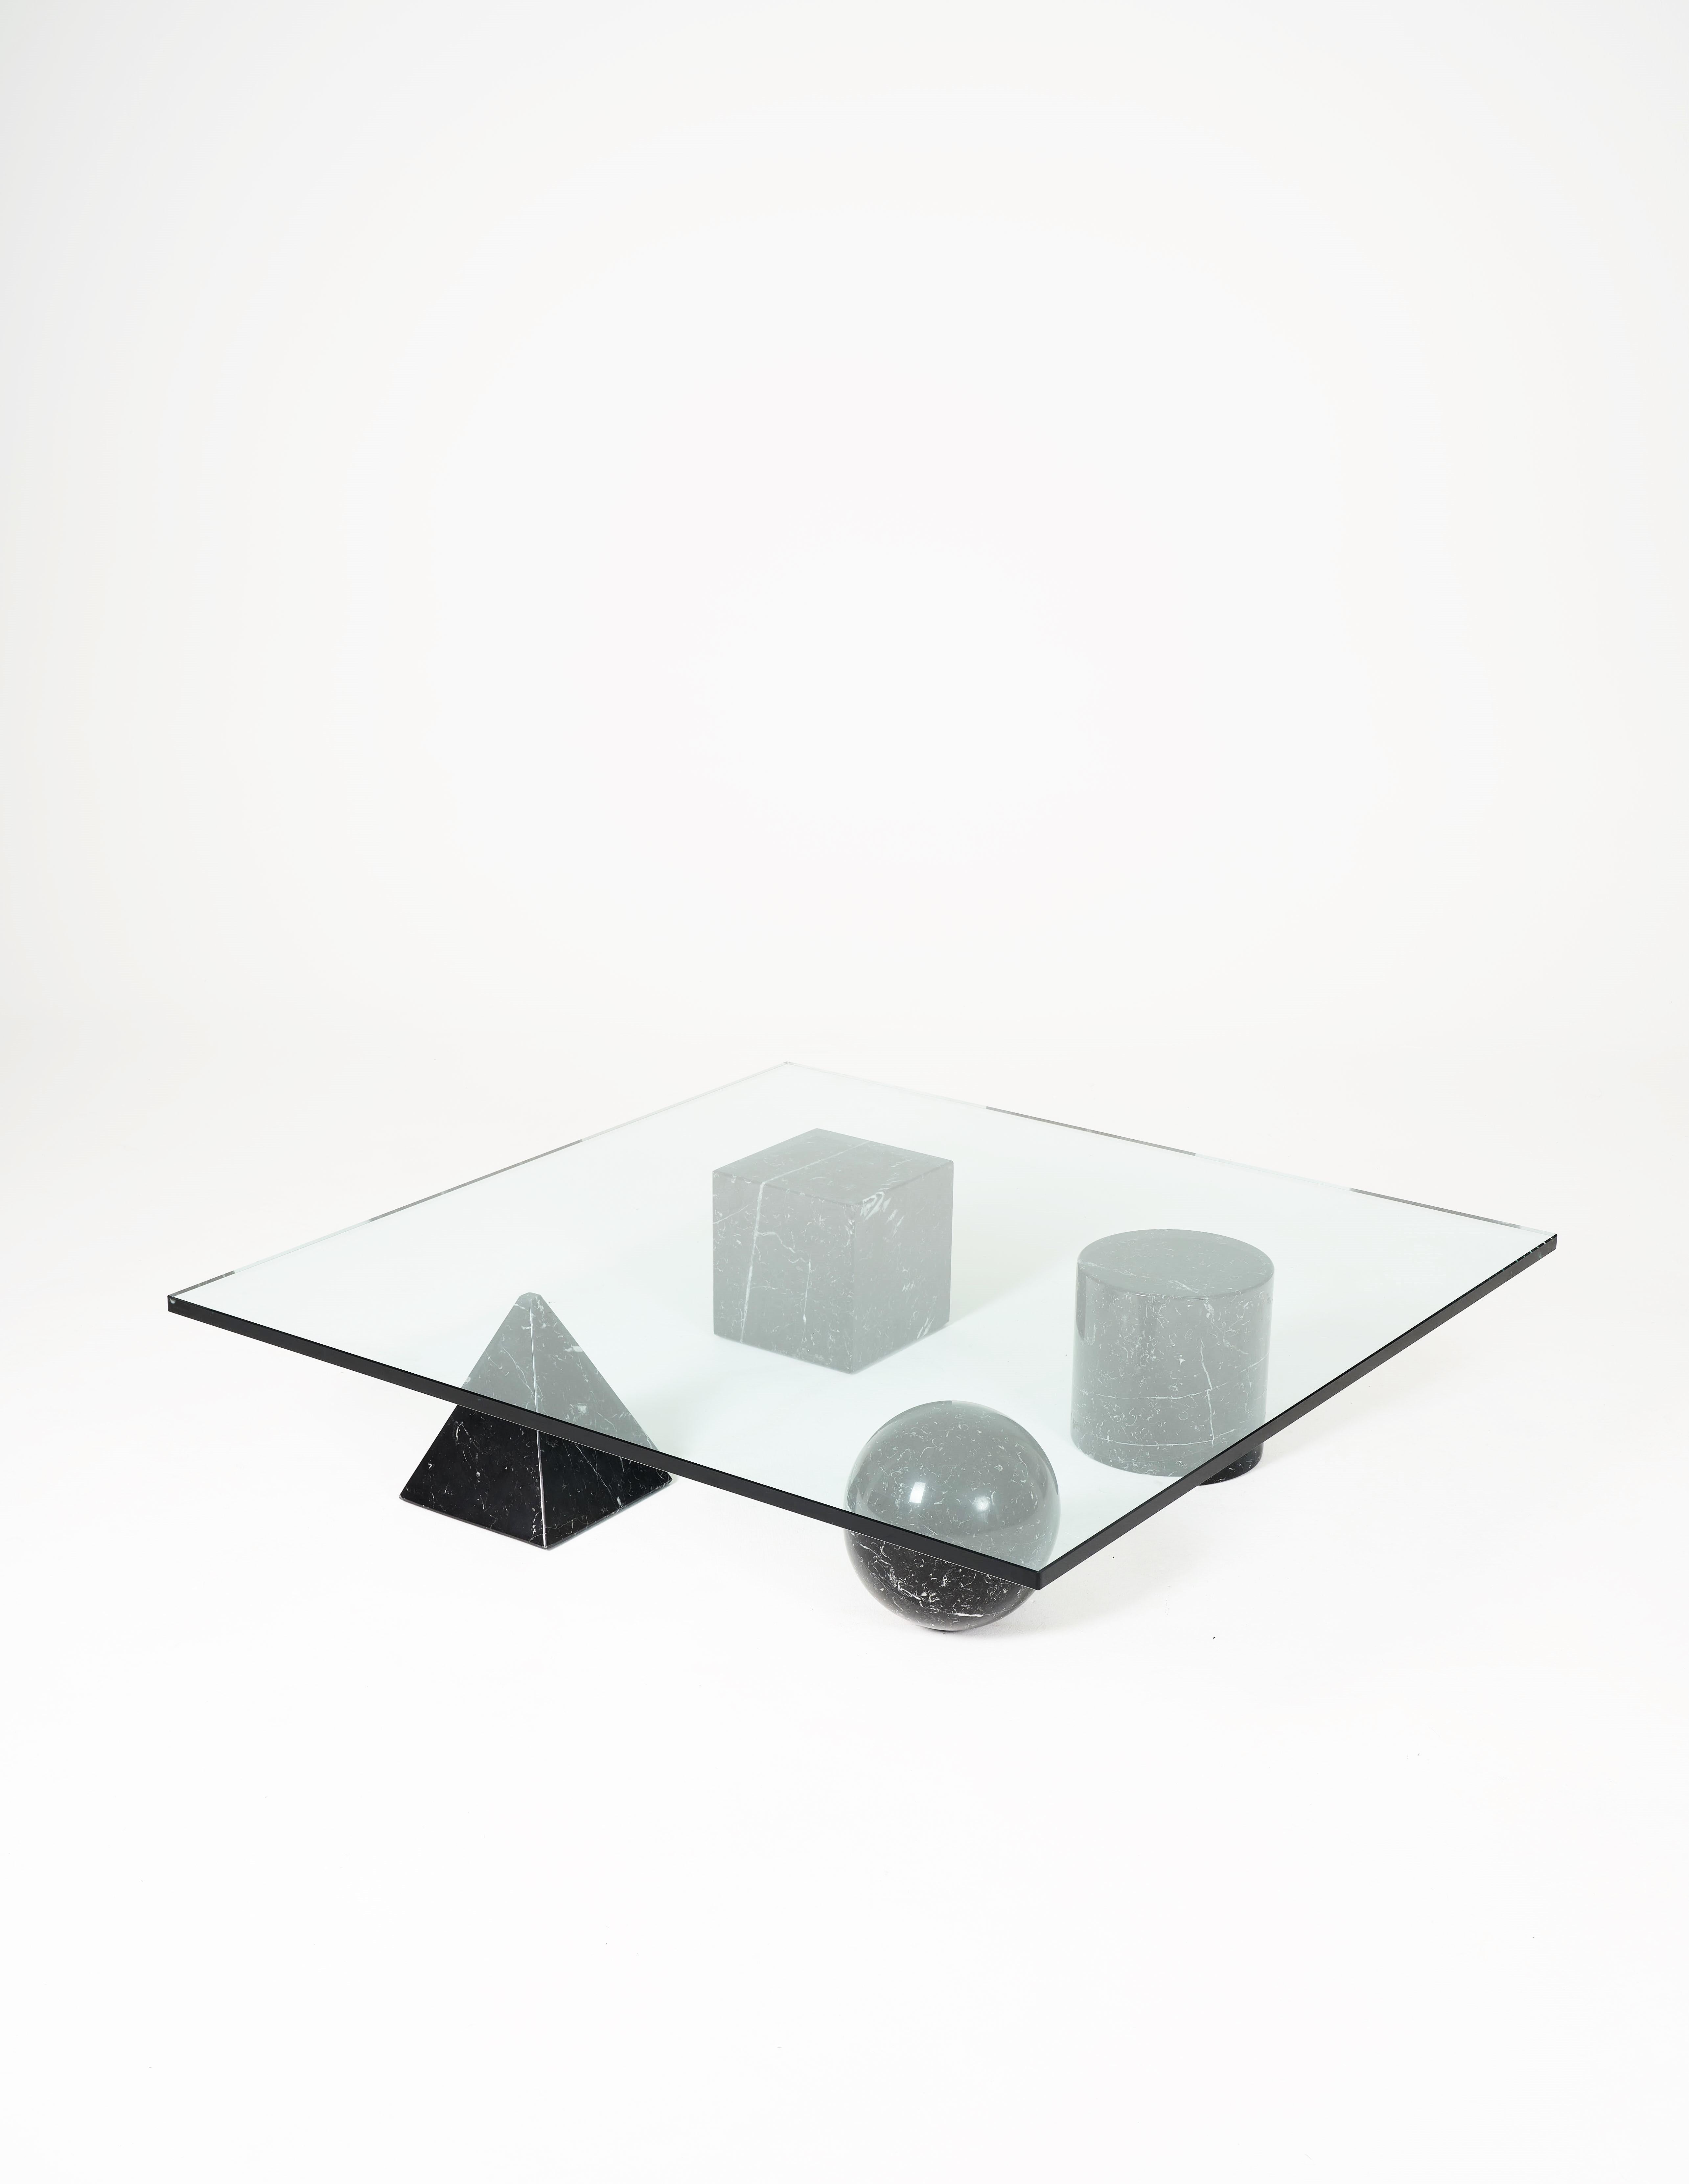 Italian geometric coffee table in travertine, marble and glass by Massimo and Lella Vignelli, 1979. The marble legs can be arranged in any way. 
Dimensions H23 X W120 X D60. Vintage edition.
 